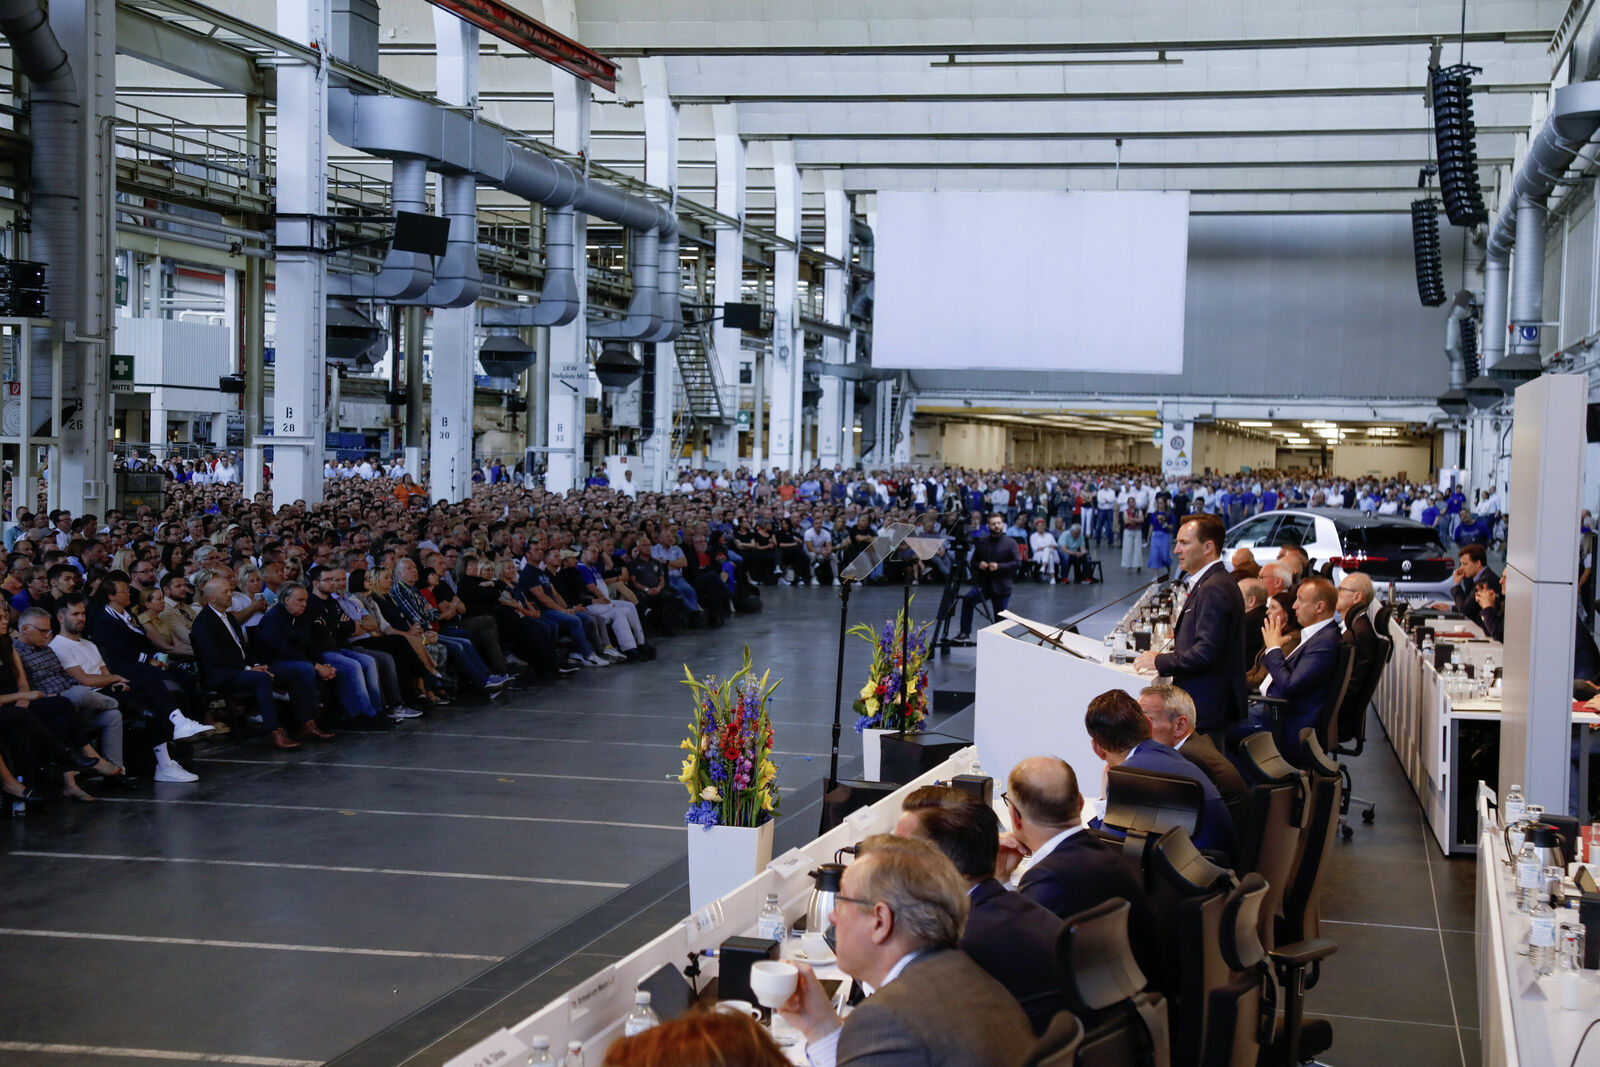 CEO Thomas Schäfer at today’s works meeting held at the Wolfsburg headquarters: “The program is the number one priority for the entire Board of Management. We are getting an enormous concerted effort off the ground to build new strength for the Volkswagen brand and position it robustly for future growth.”